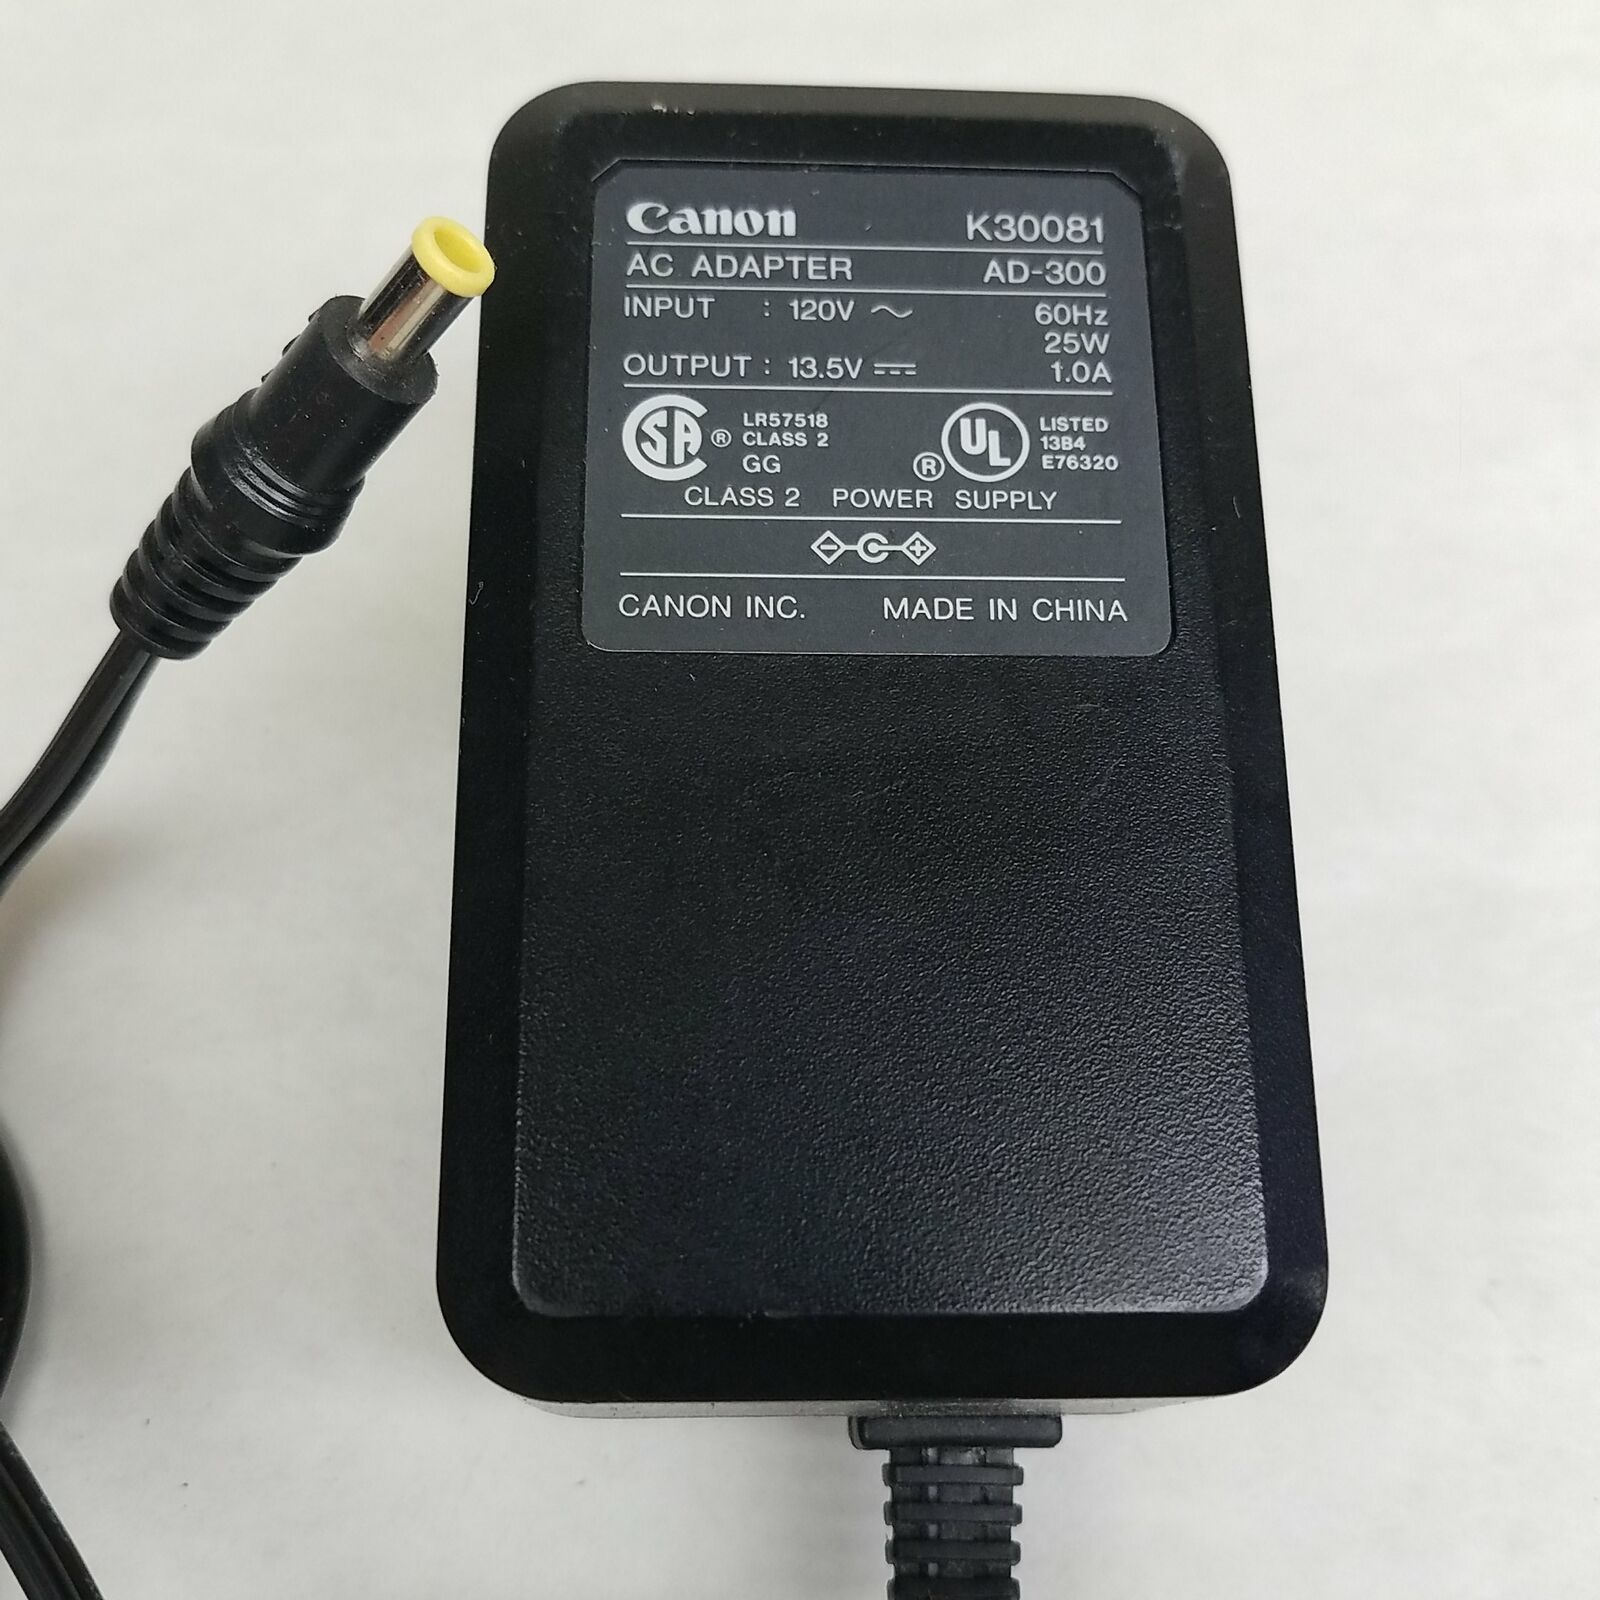 New Canon K30081 AD-300 Printer Power Adapter Power Supply 13.5V 1.0A AC Adapter